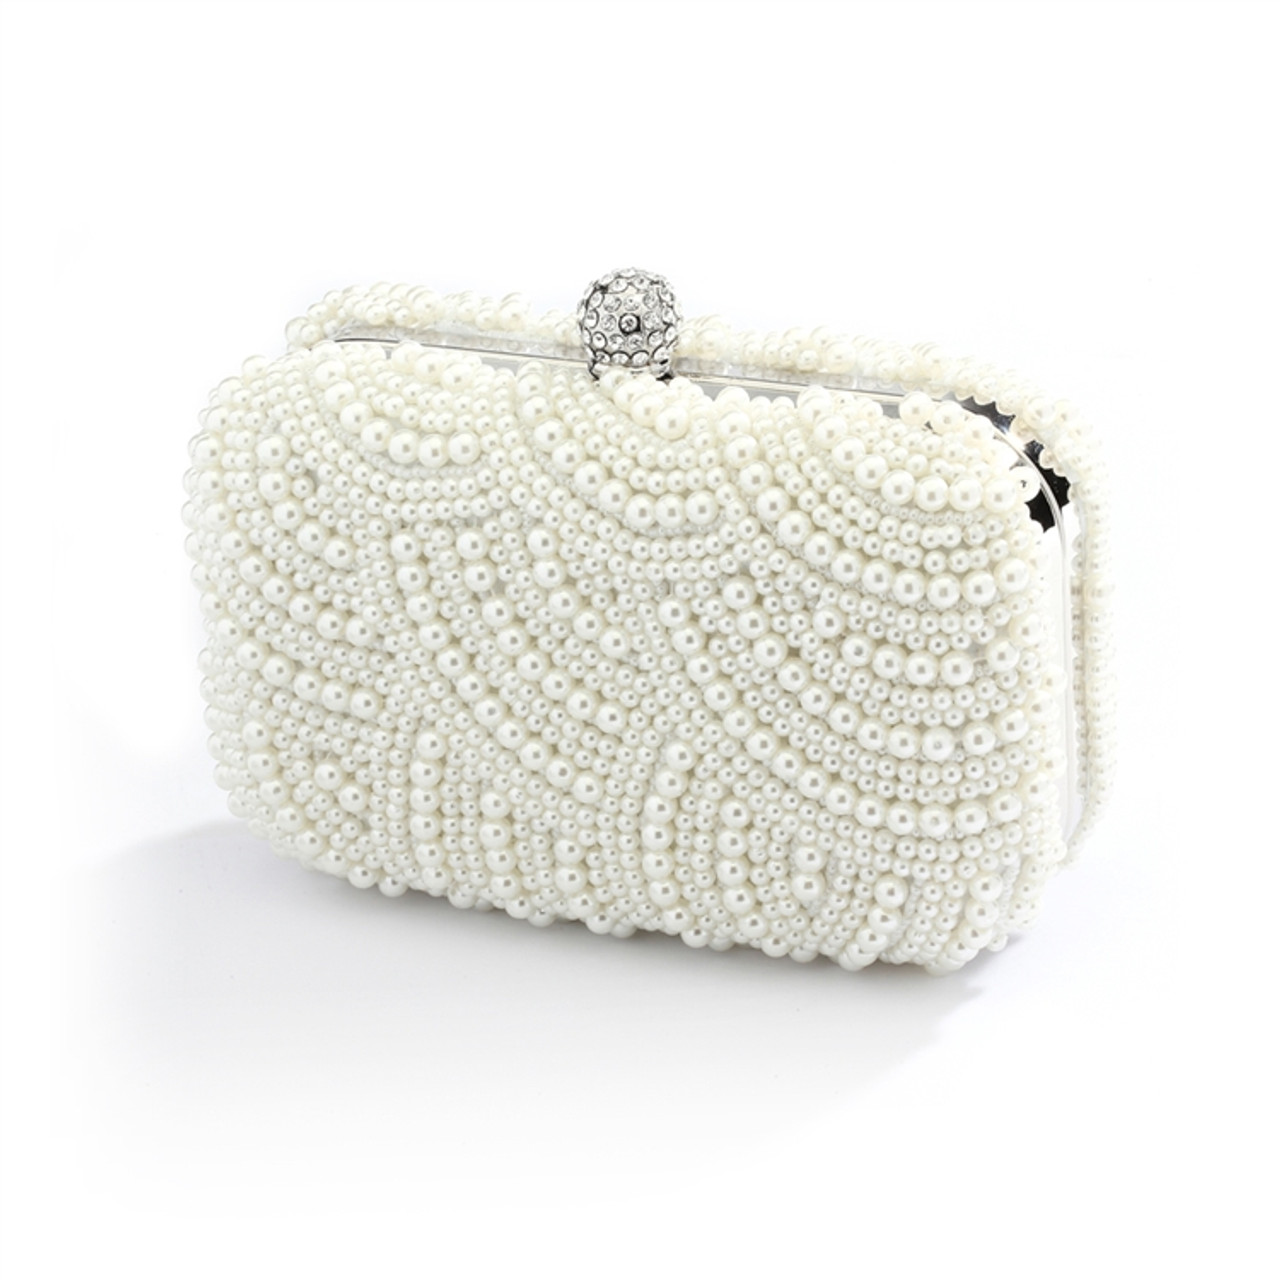 Luxe designer handbags and clutches for the bride and bridesmaids